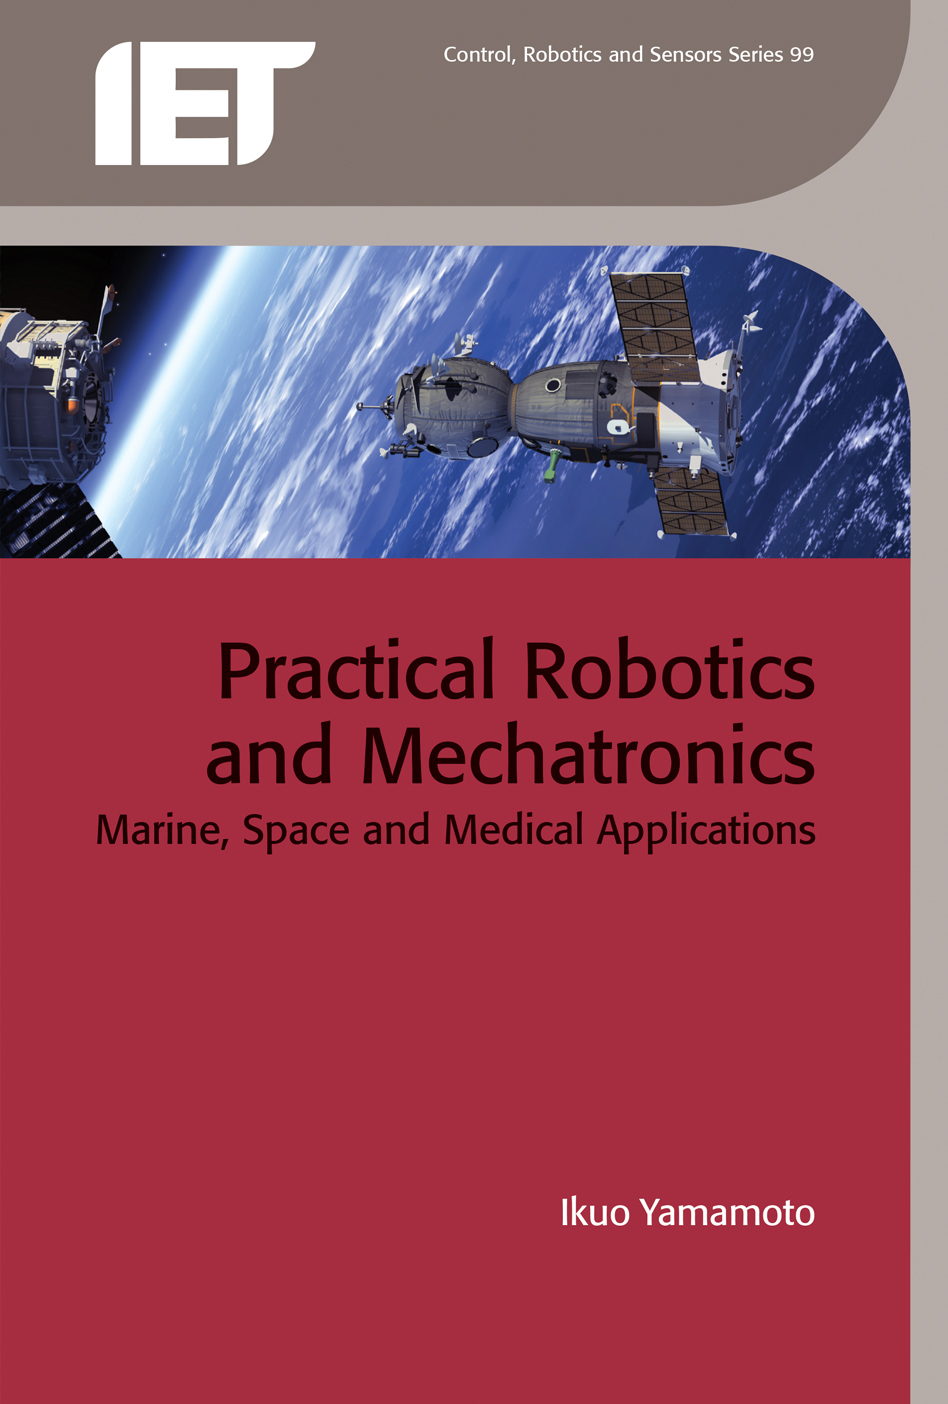 Practical Robotics and Mechatronics, Marine, space and medical applications